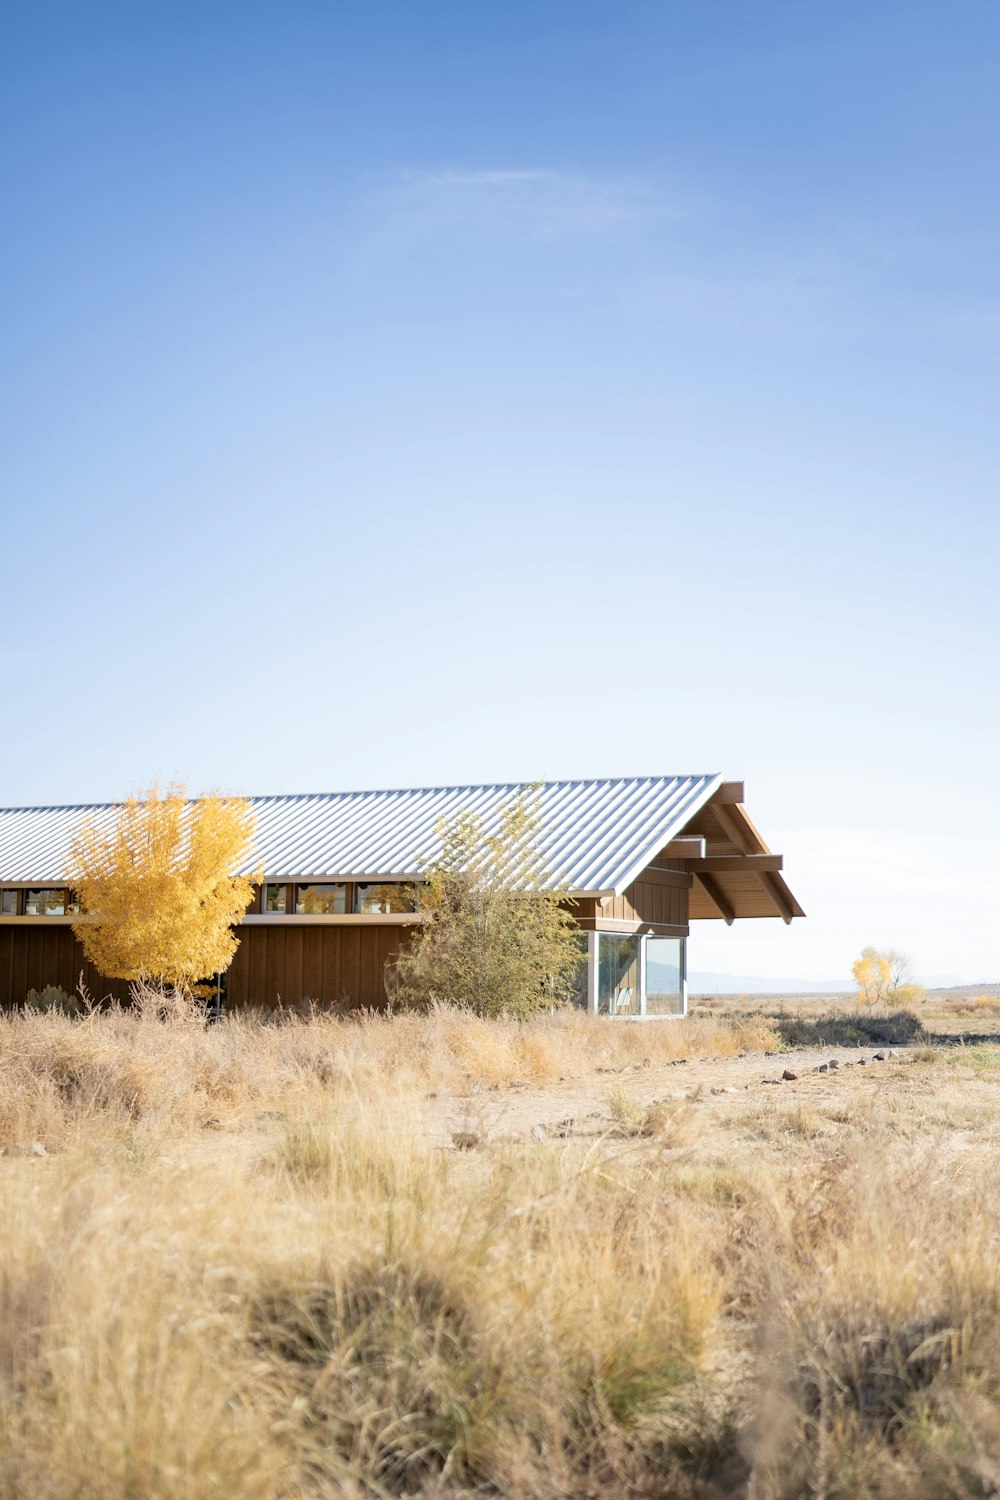 a house in the middle of a dry grass field